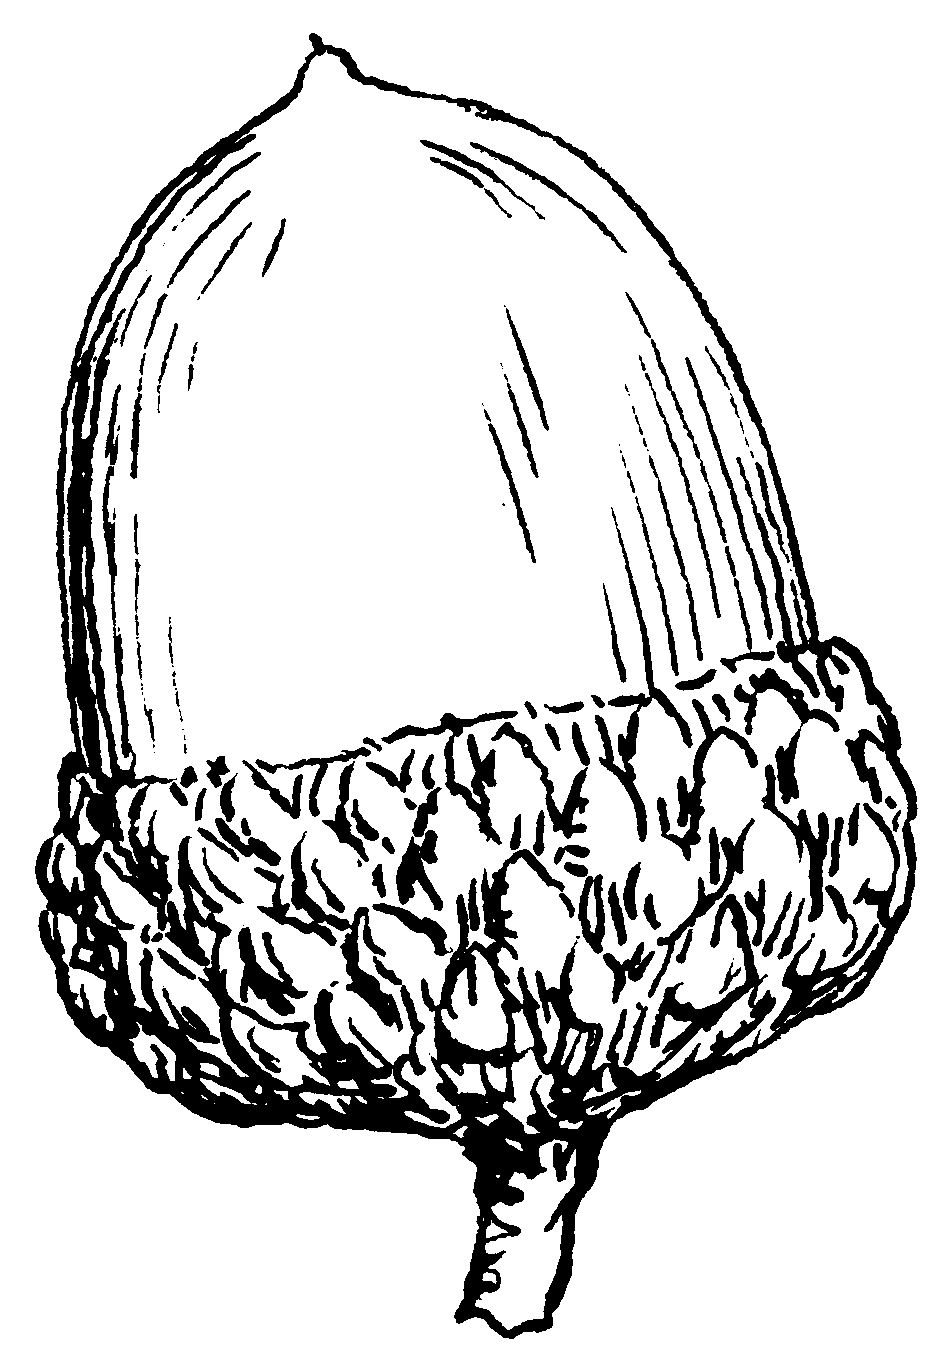 acorn drawing a line